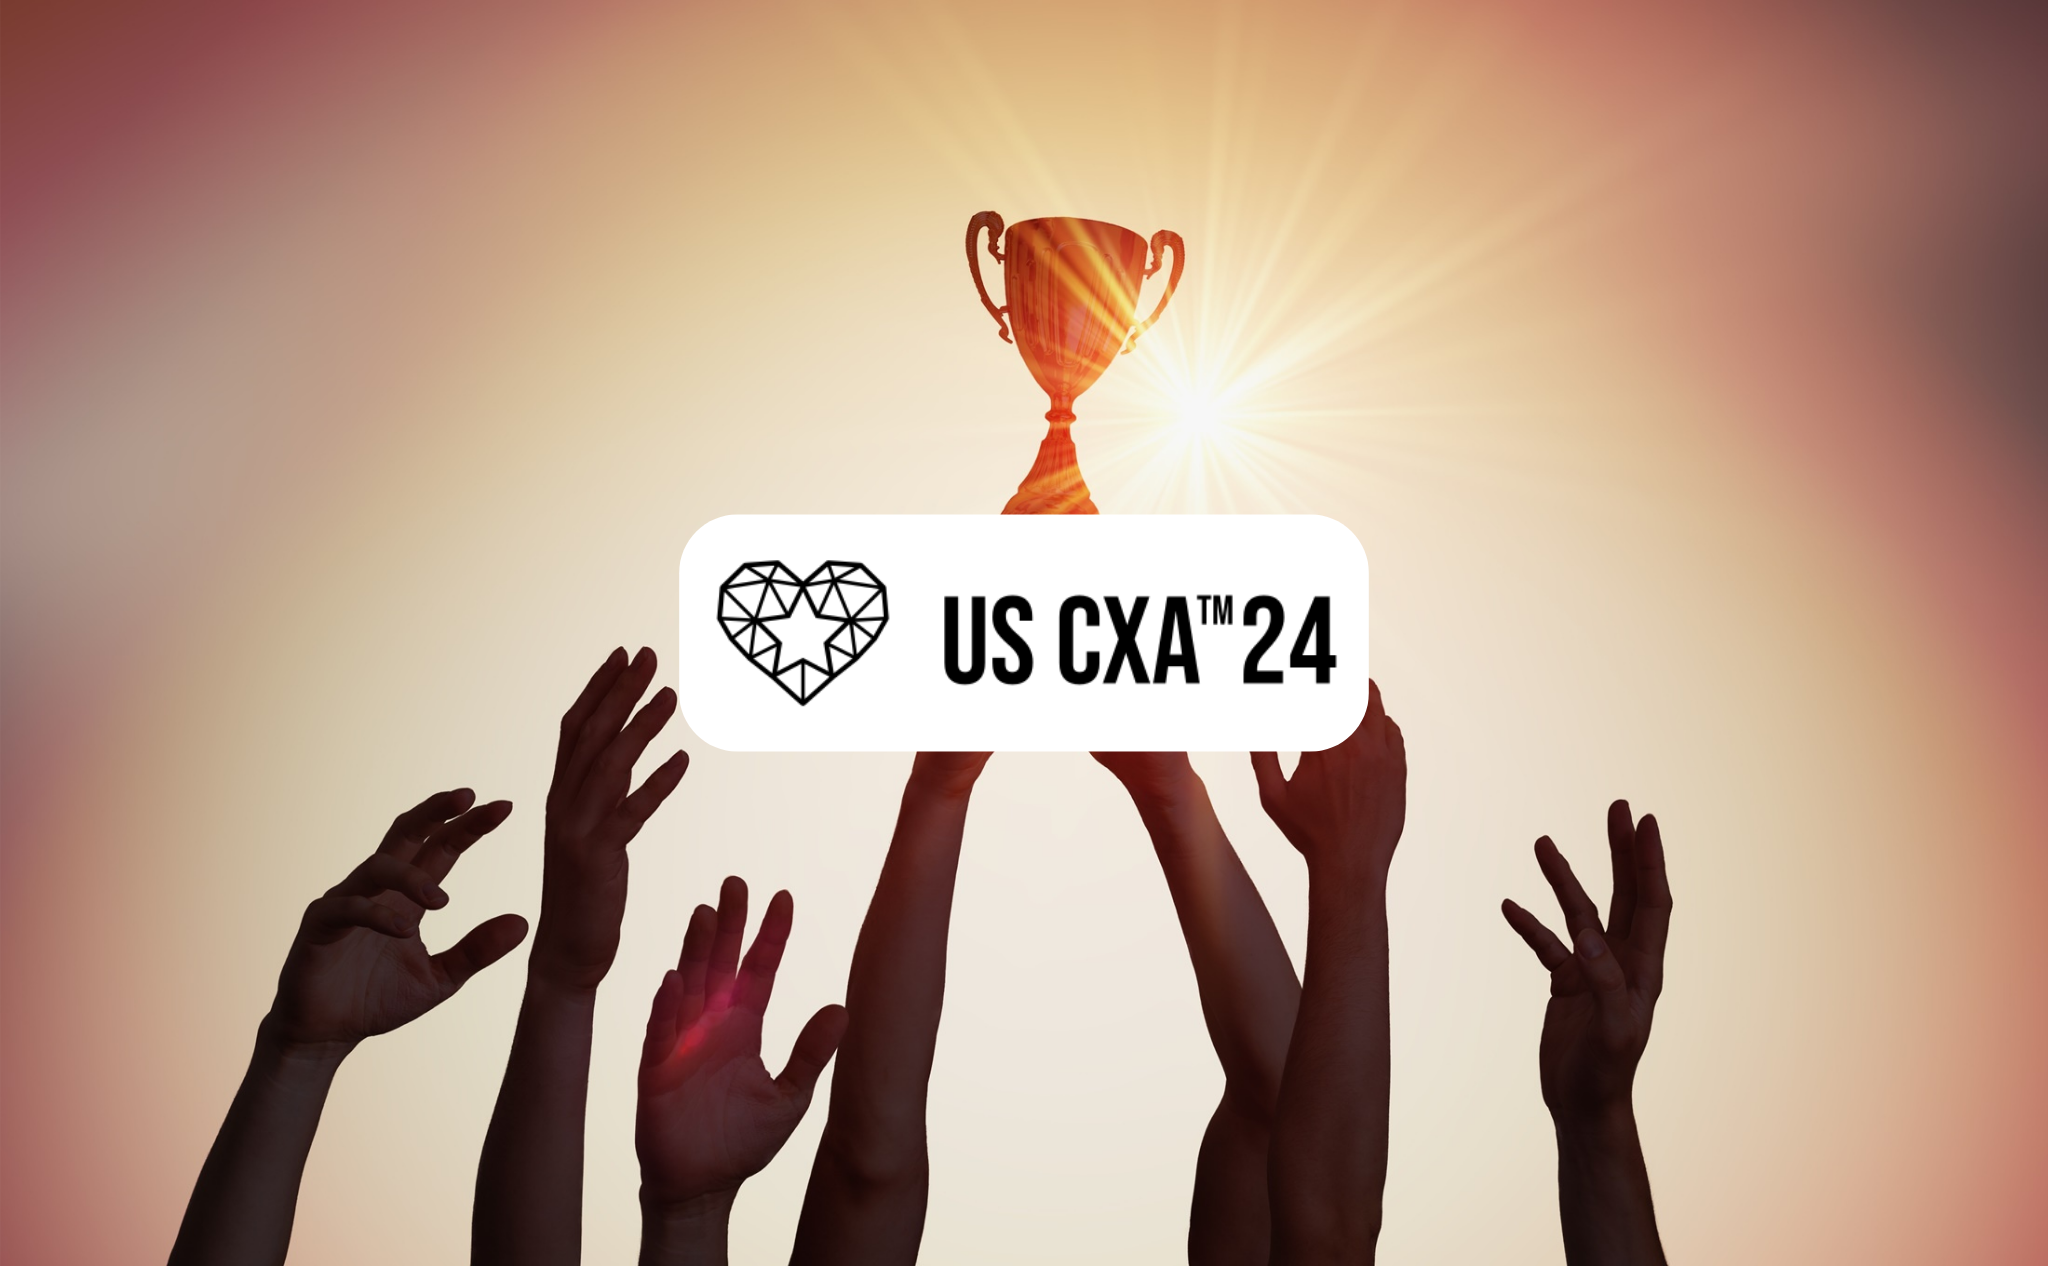 US Customer Experience Awards 24 Are Now Live and Open for Entries!